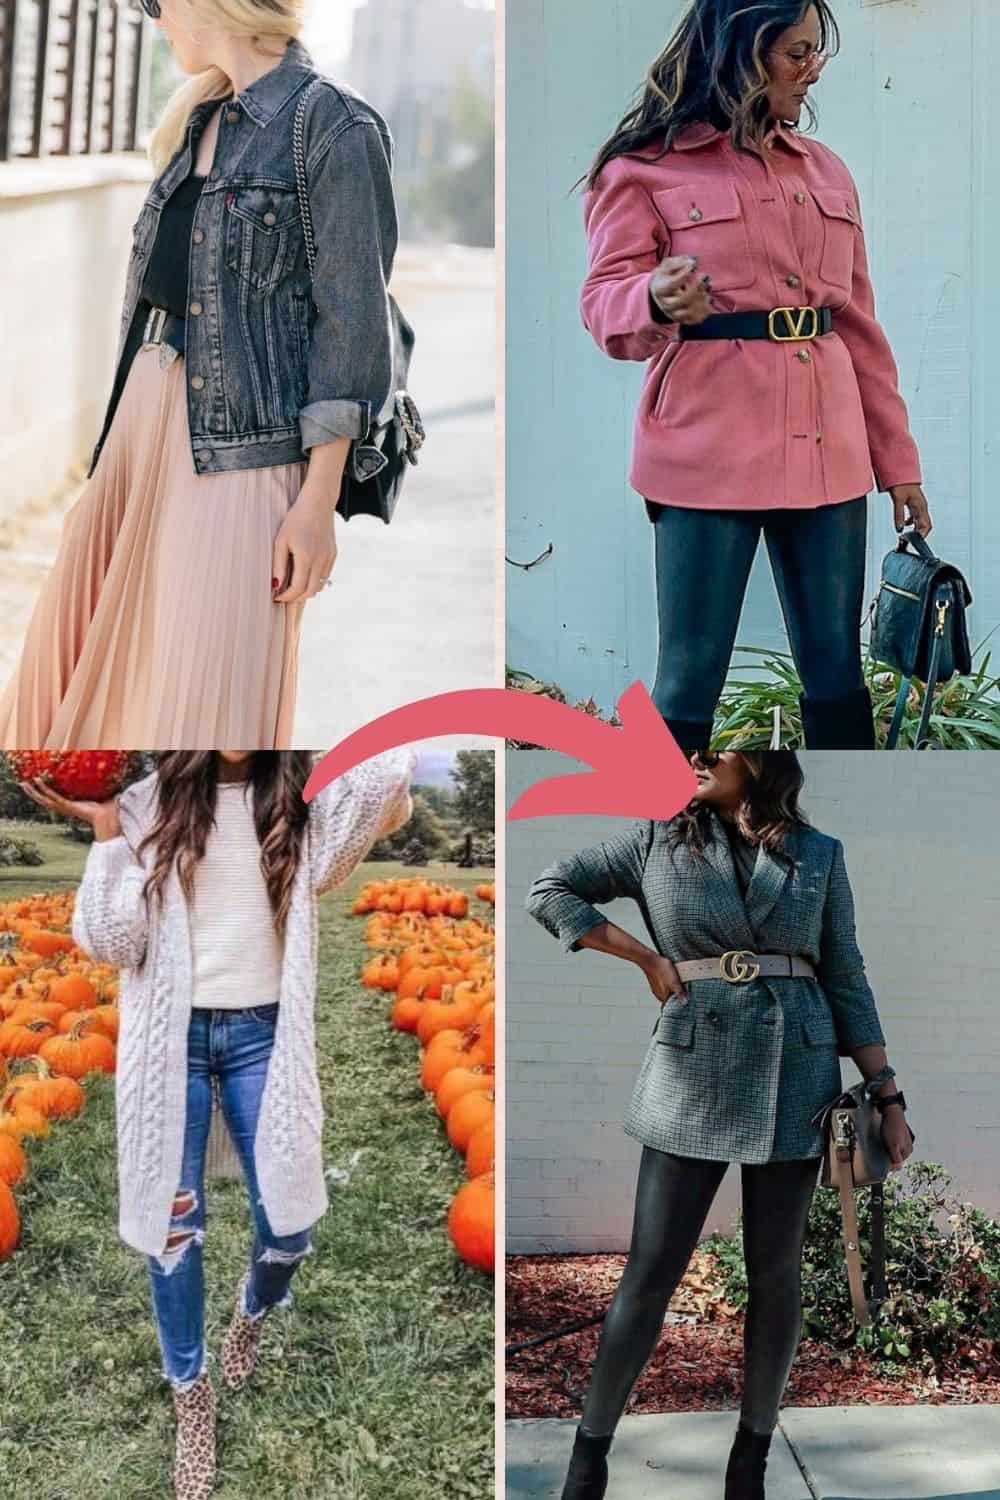 10 Items To Toss This Fall & Winter Thats Making You Look Frumpy